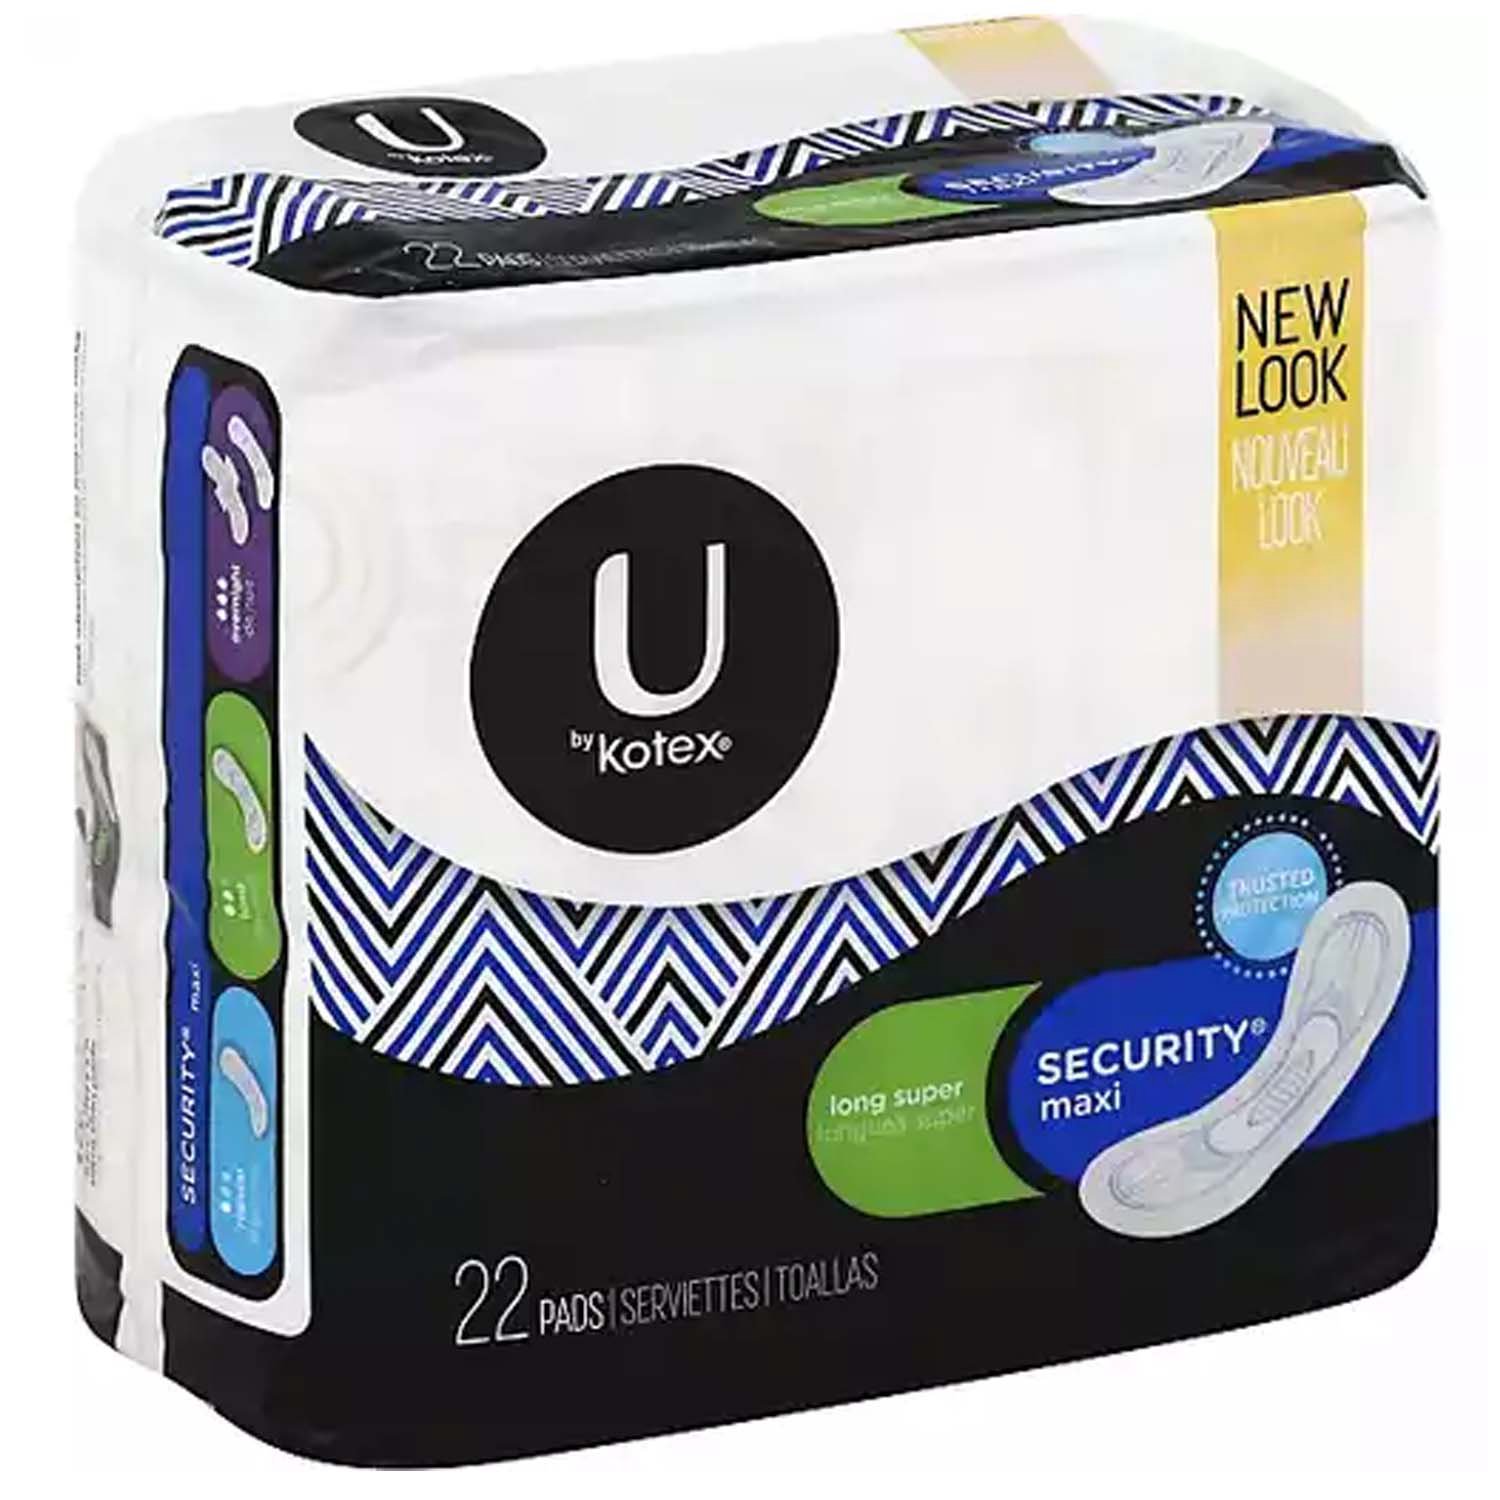  U by Kotex Clean & Secure Maxi Pads, Heavy Absorbency, 132  Count (3 Packs of 44) (Packaging May Vary) : Health & Household